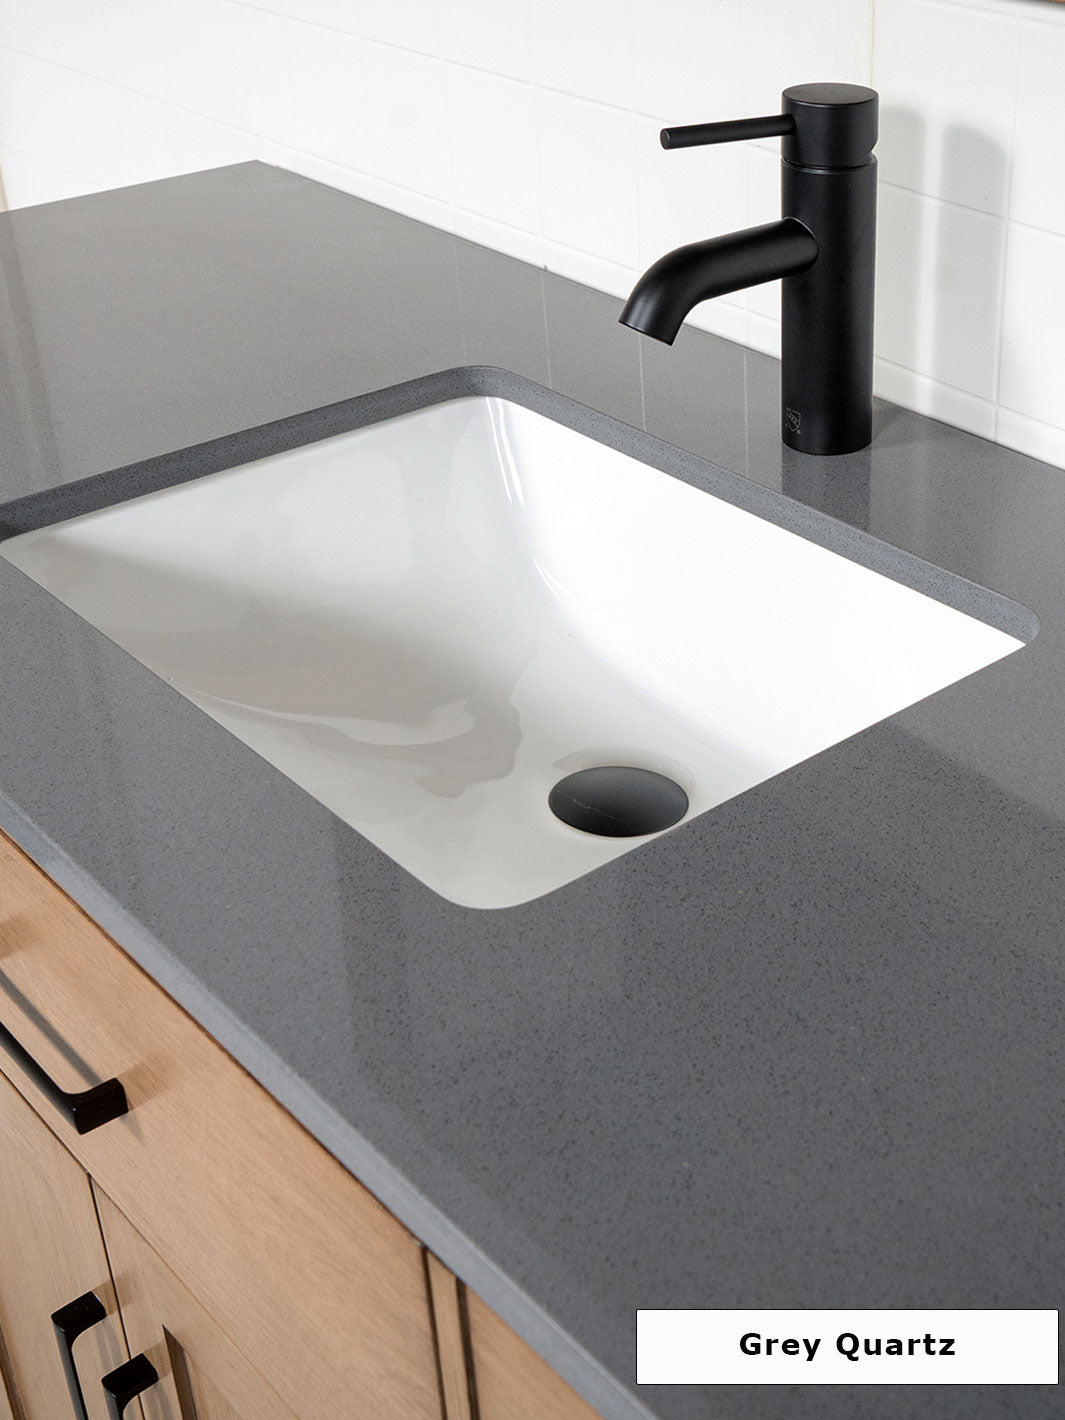 grey quartz counter with attached undermount sink and matte black faucet